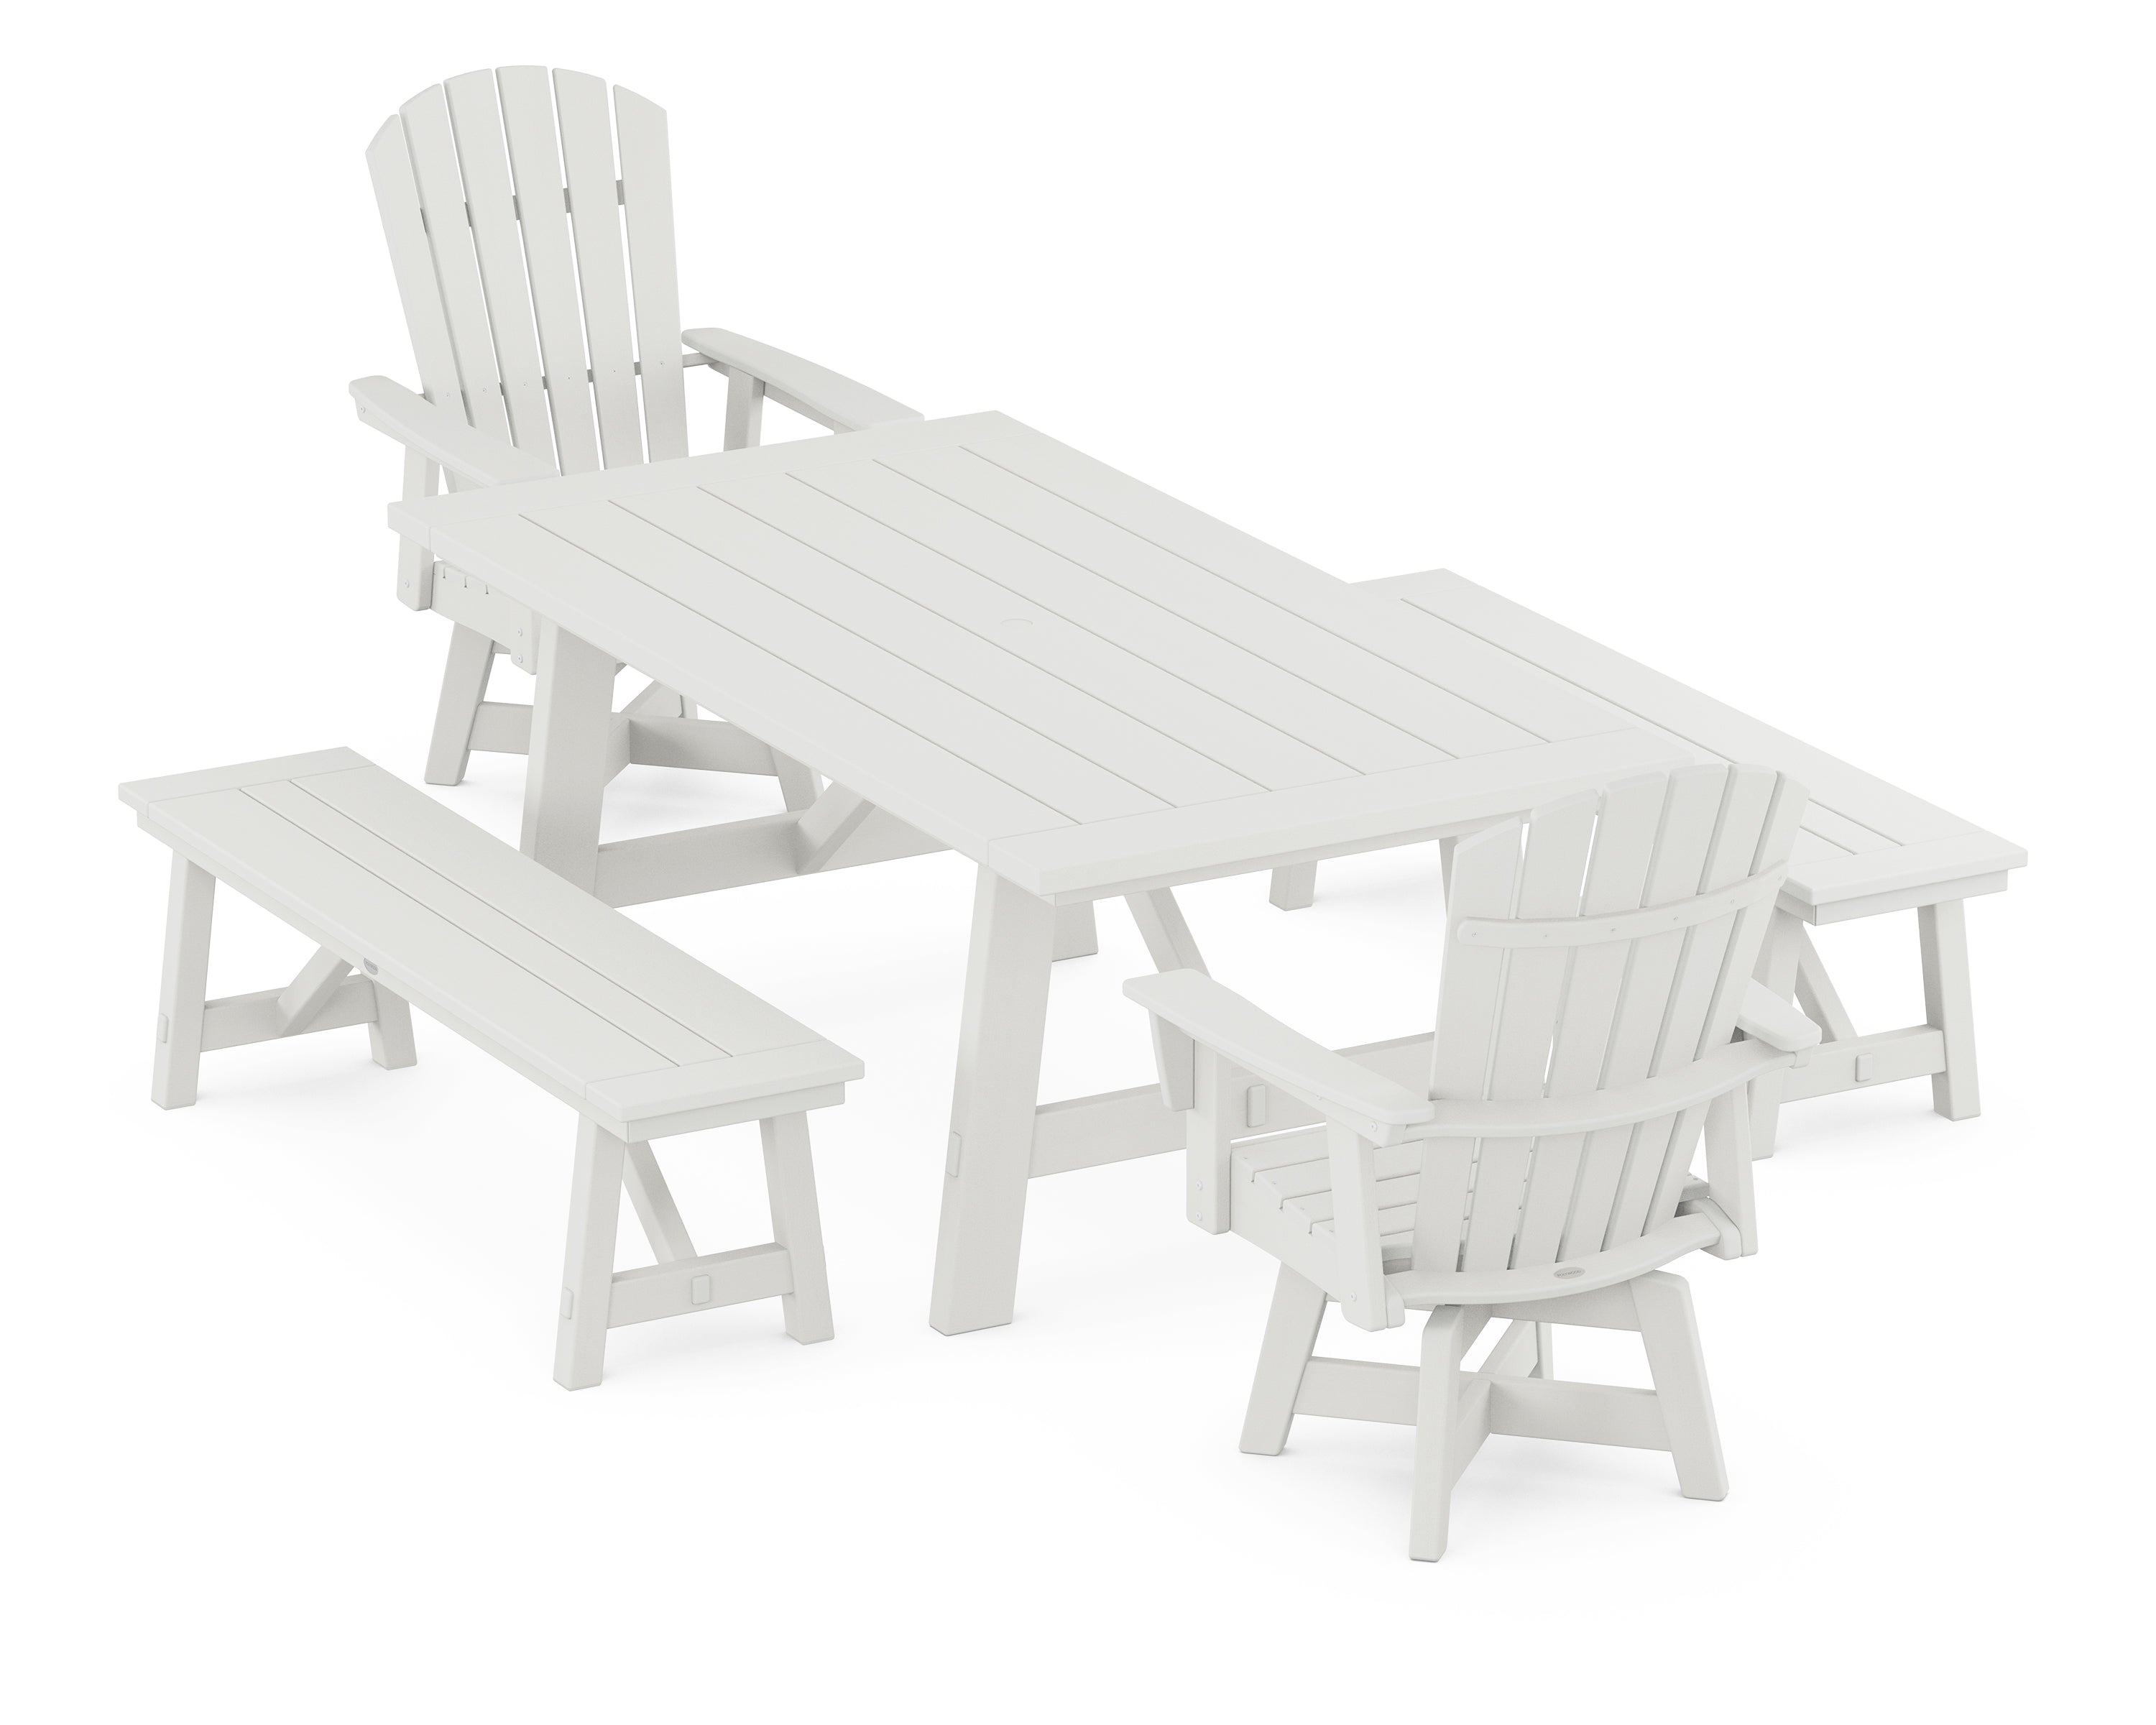 POLYWOOD® Nautical Curveback Adirondack Swivel Chair 5-Piece Rustic Farmhouse Dining Set With Benches in Vintage White